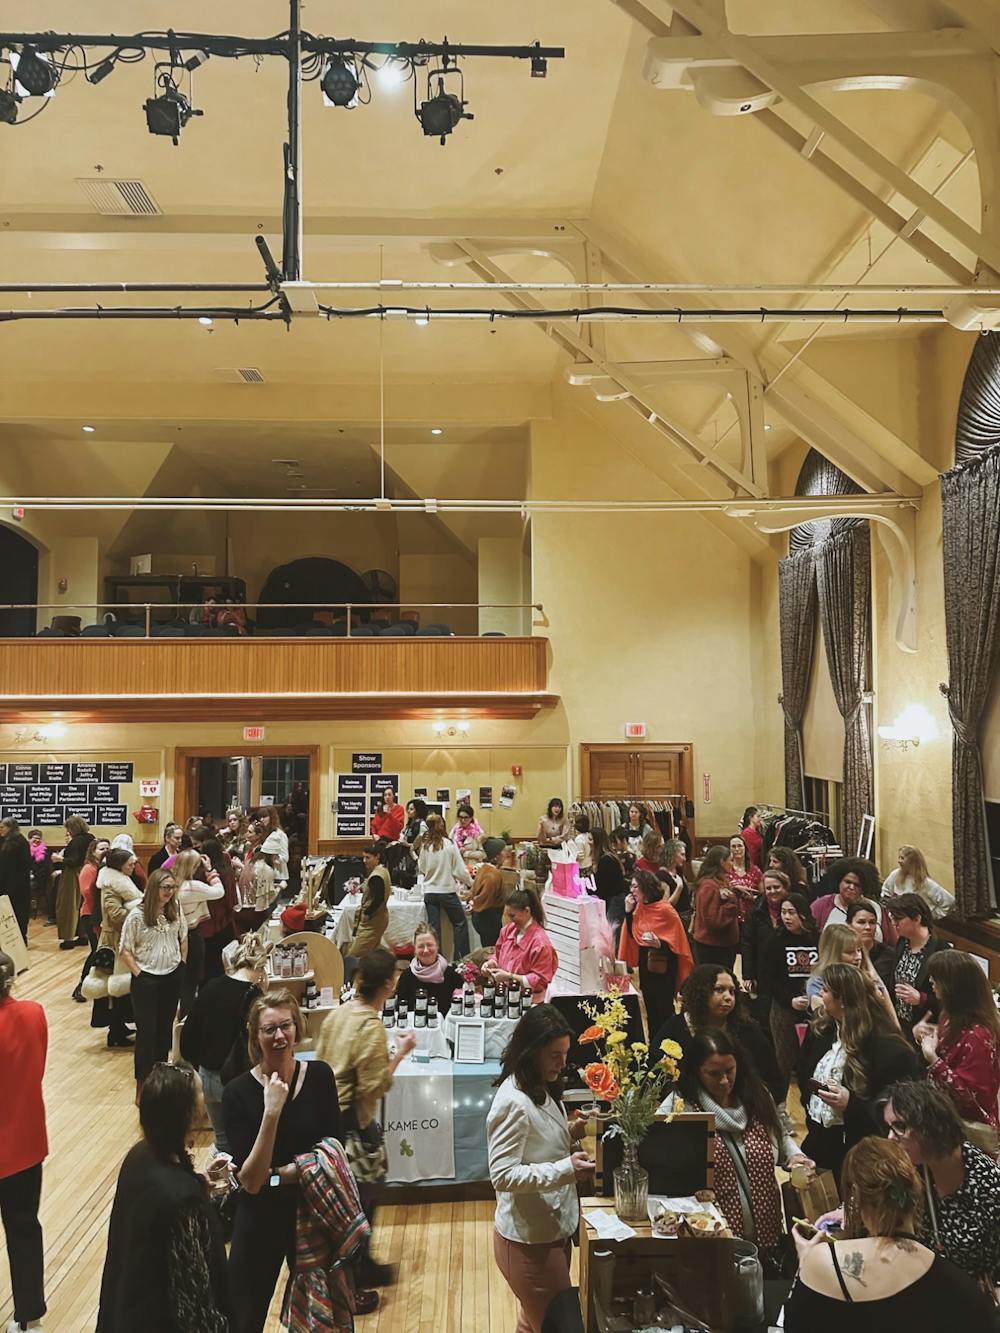 Over 140 people and and 16 women owned businesses were a part of the Galentine’s Celebration at Vergennes Opera.